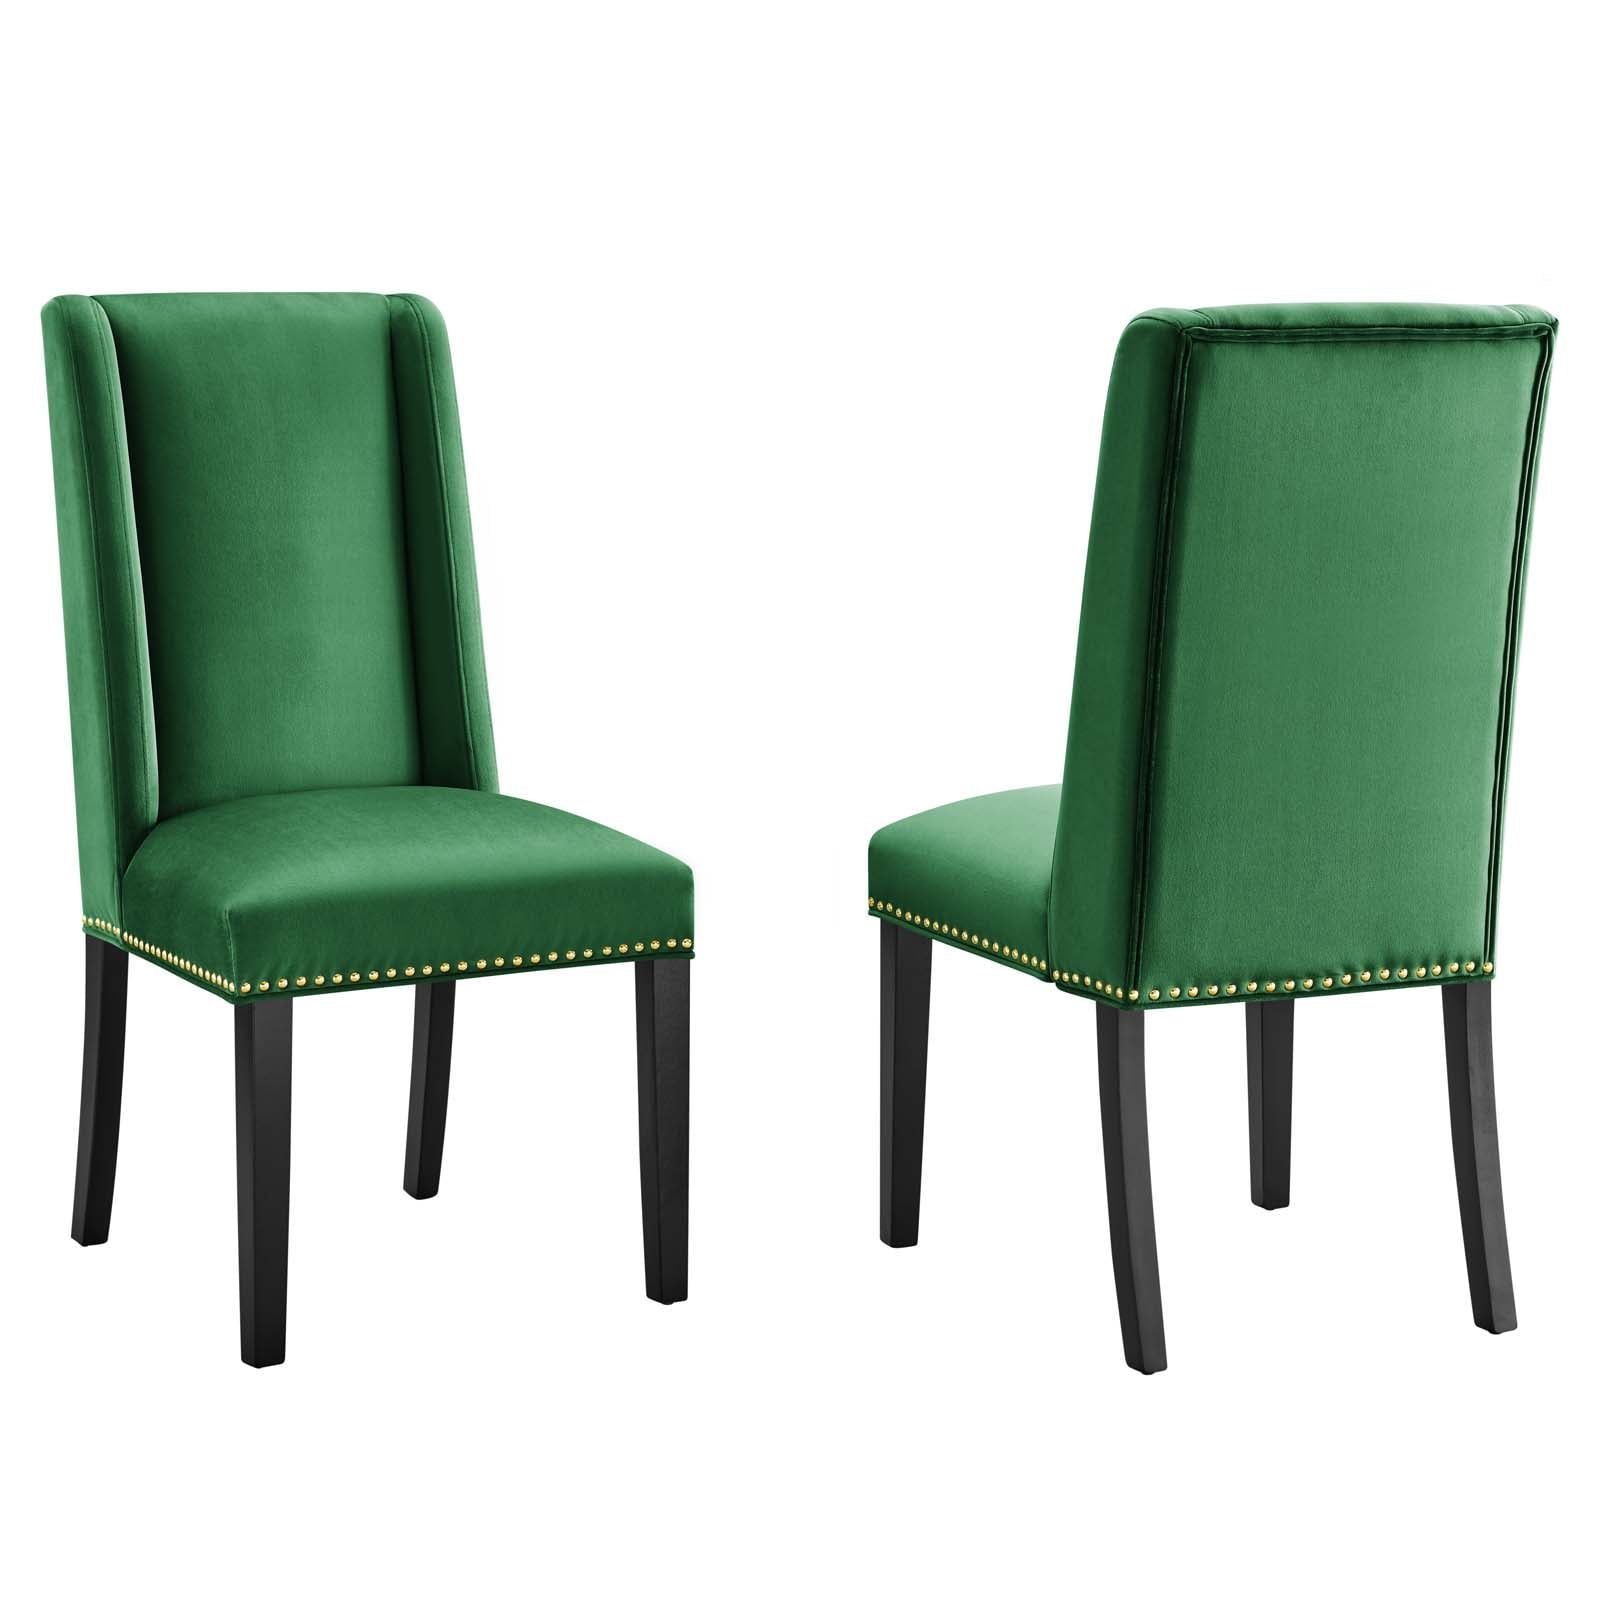 Emerald Velvet Upholstered Side Chair with Polished Nailhead Trim